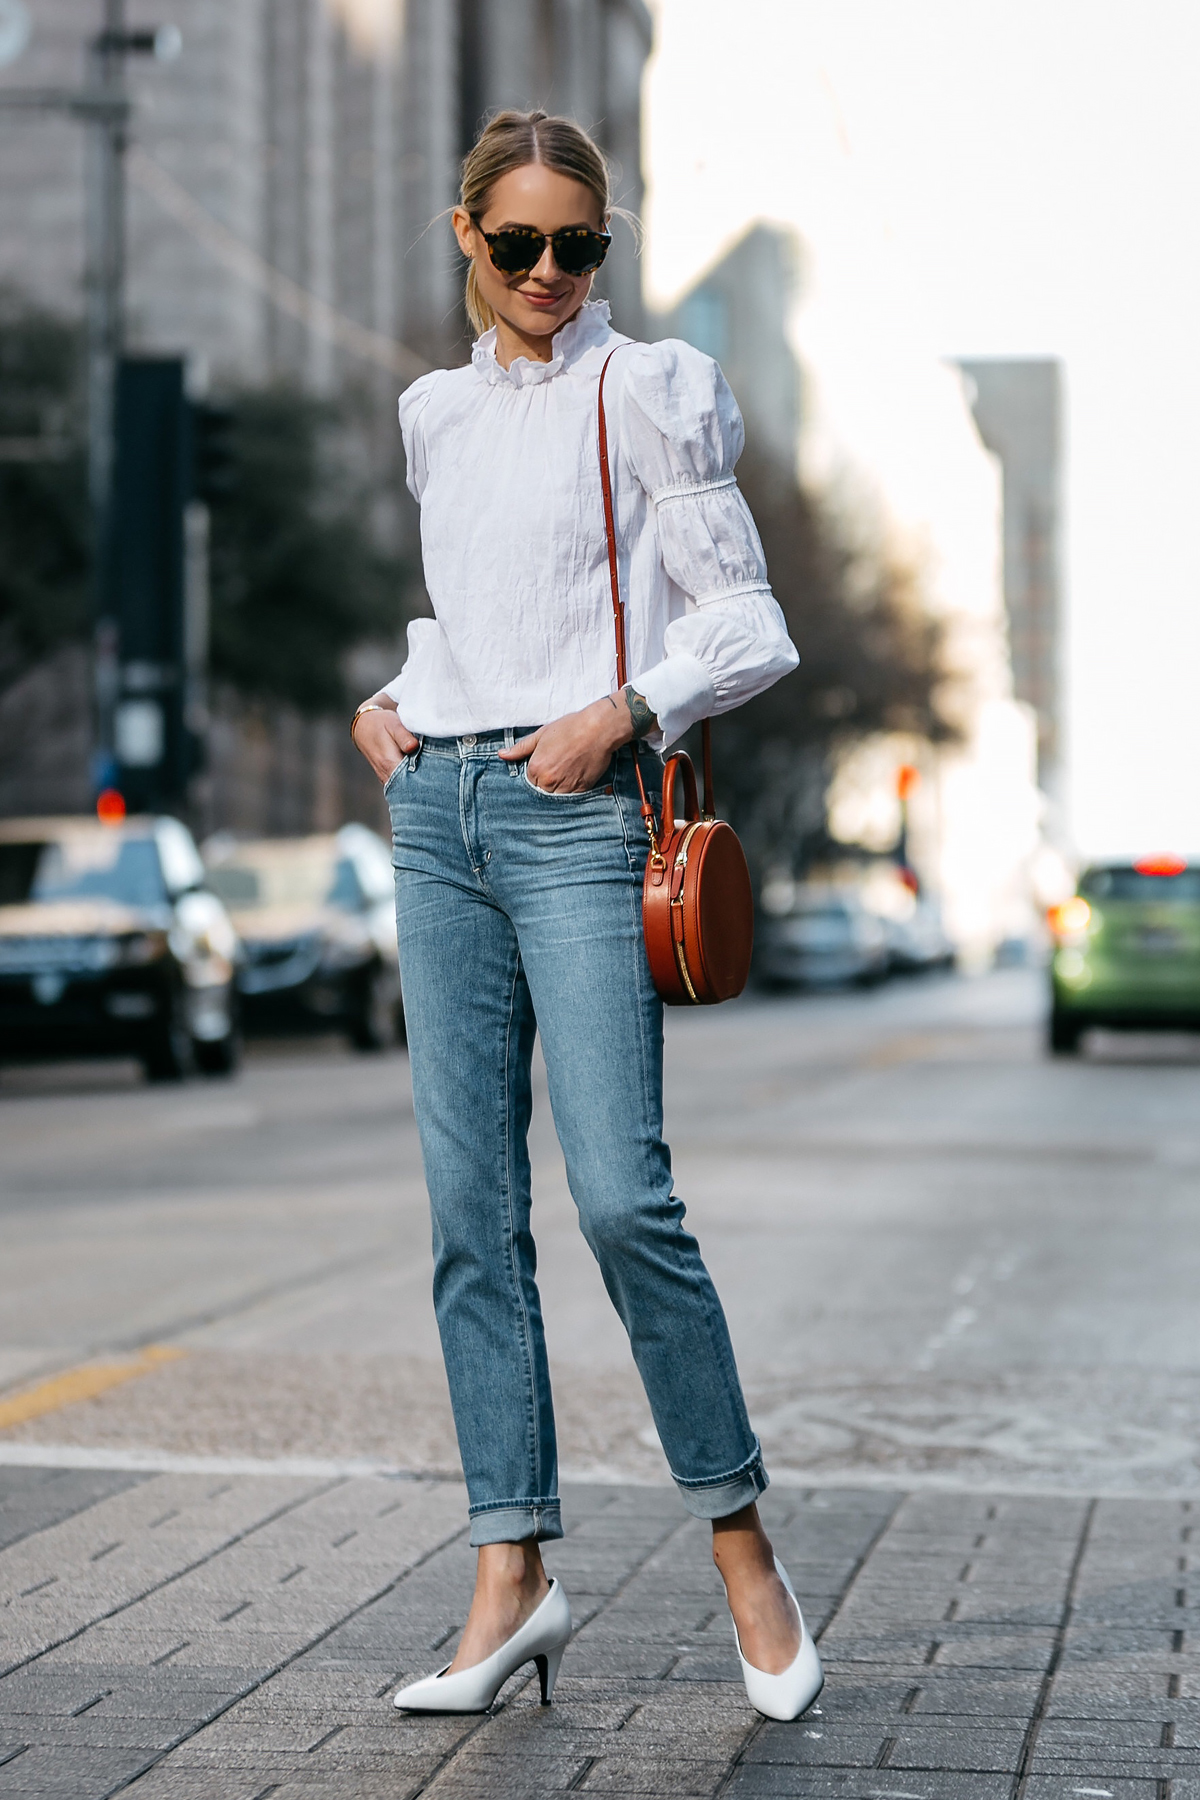 How To Wear White Ruffle Top